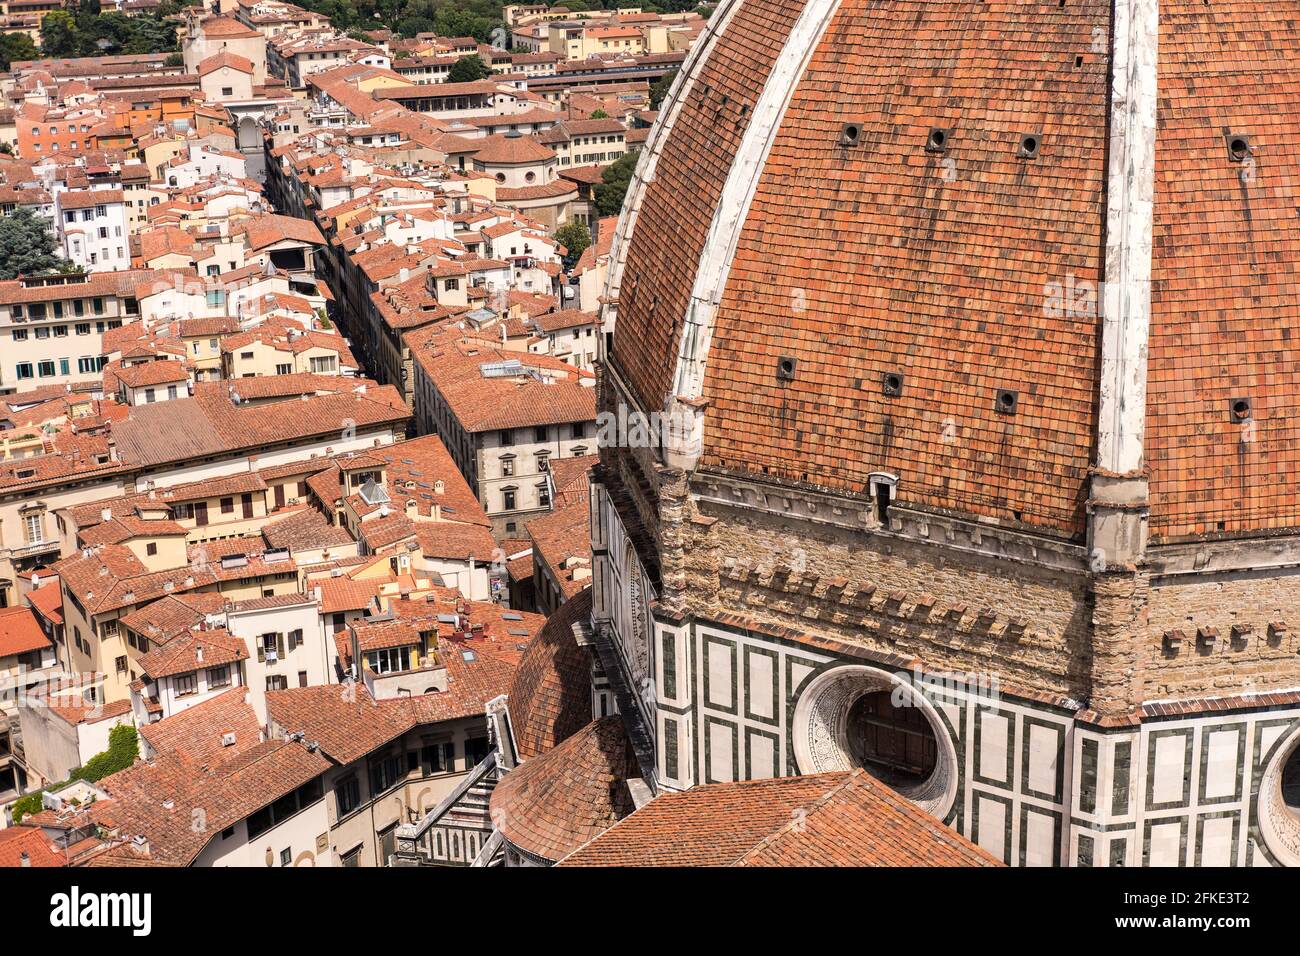 Aerial view of Florence, Italy. With Florence Duomo Cathedral. Basilica di Santa Maria del Fiore or Basilica of Saint Mary of the Flower. Stock Photo